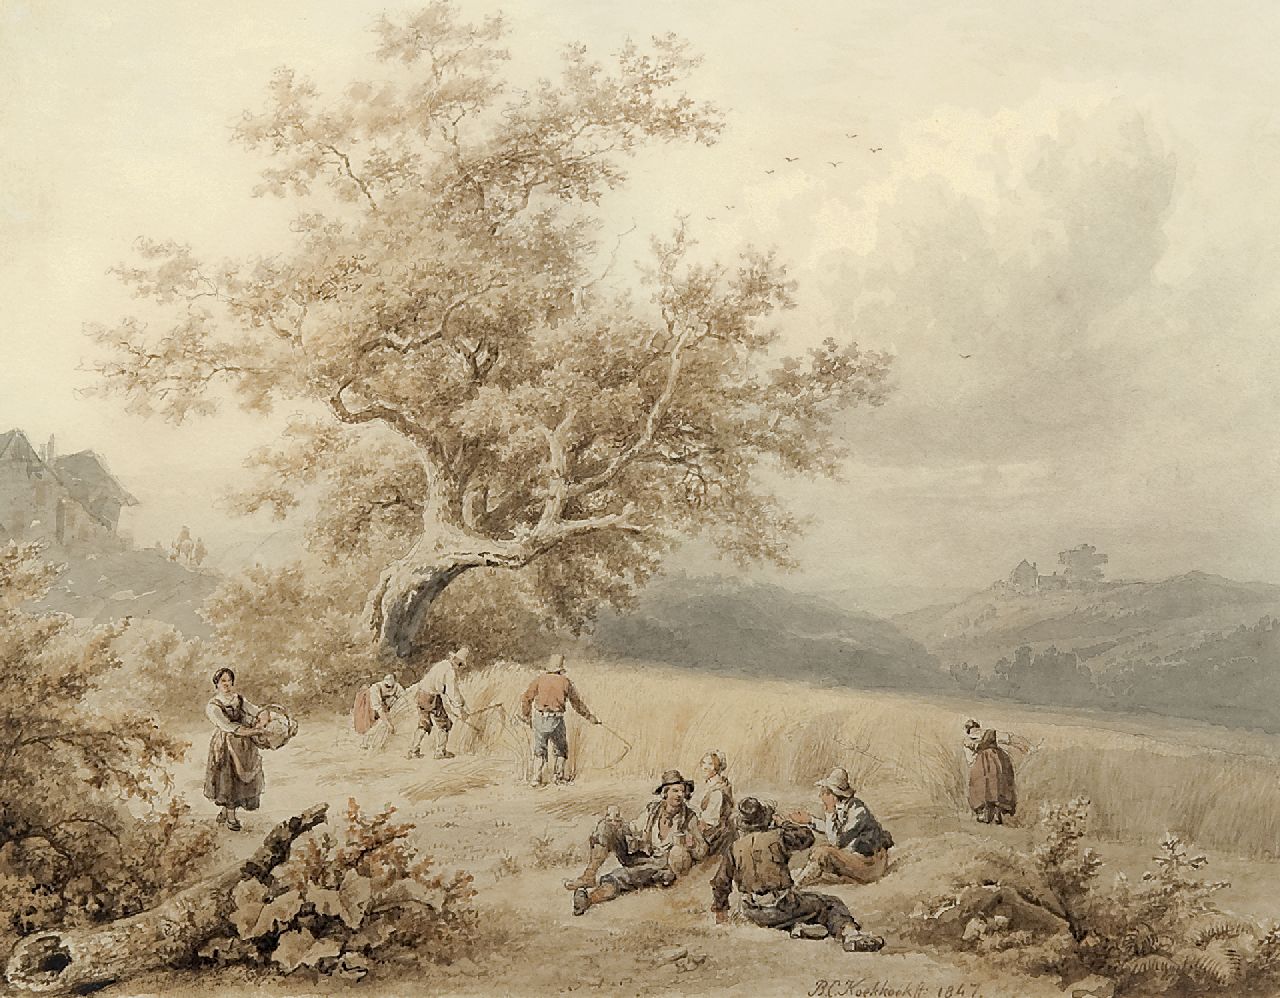 Barend Cornelis Koekkoek | Harvest time, Luxemburg, ink and watercolour on paper, 19.6 x 24.9 cm, signed l.c. and dated 1847